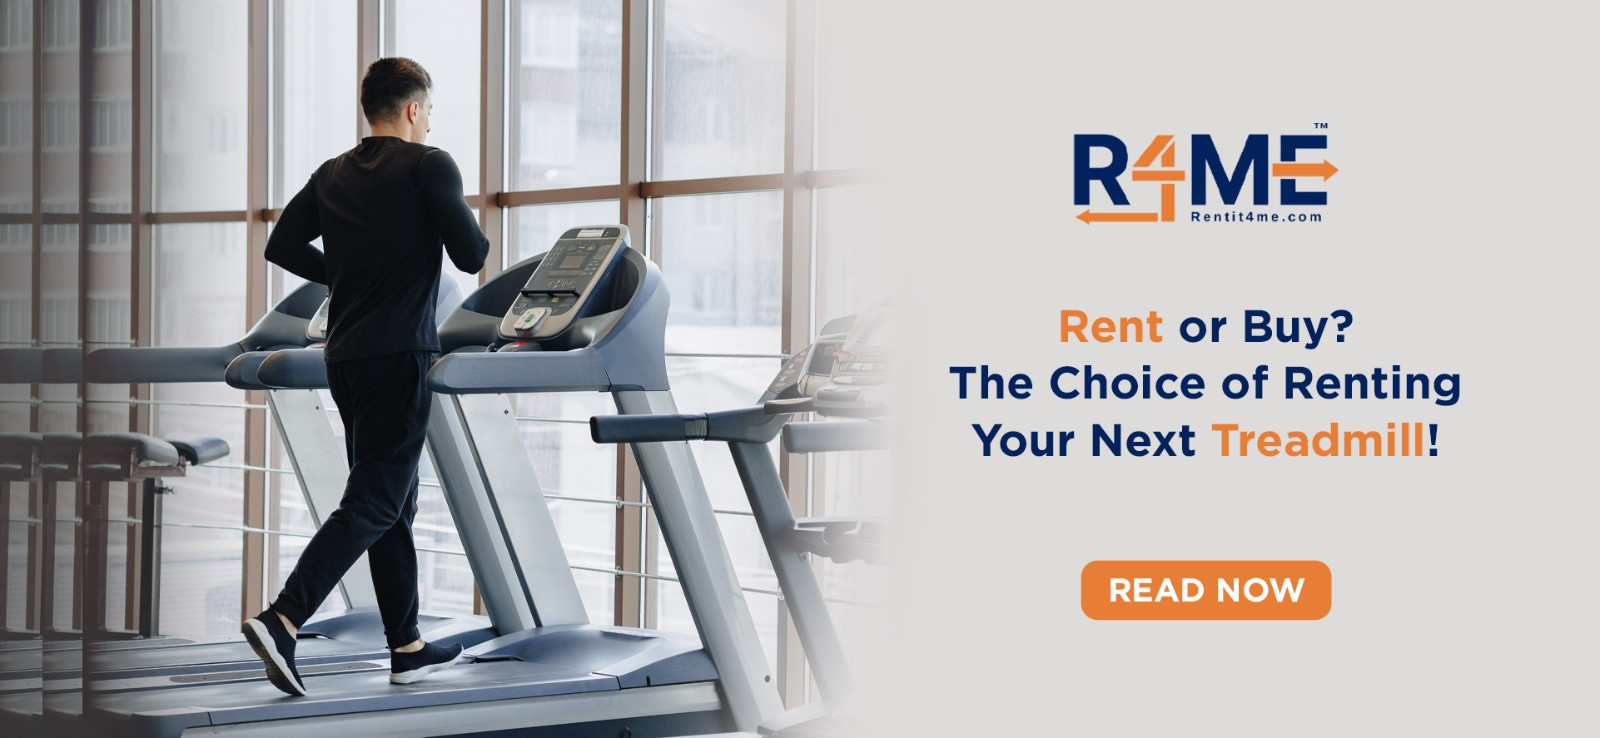 Rent or Buy? The Choice of Renting Your Next Treadmill